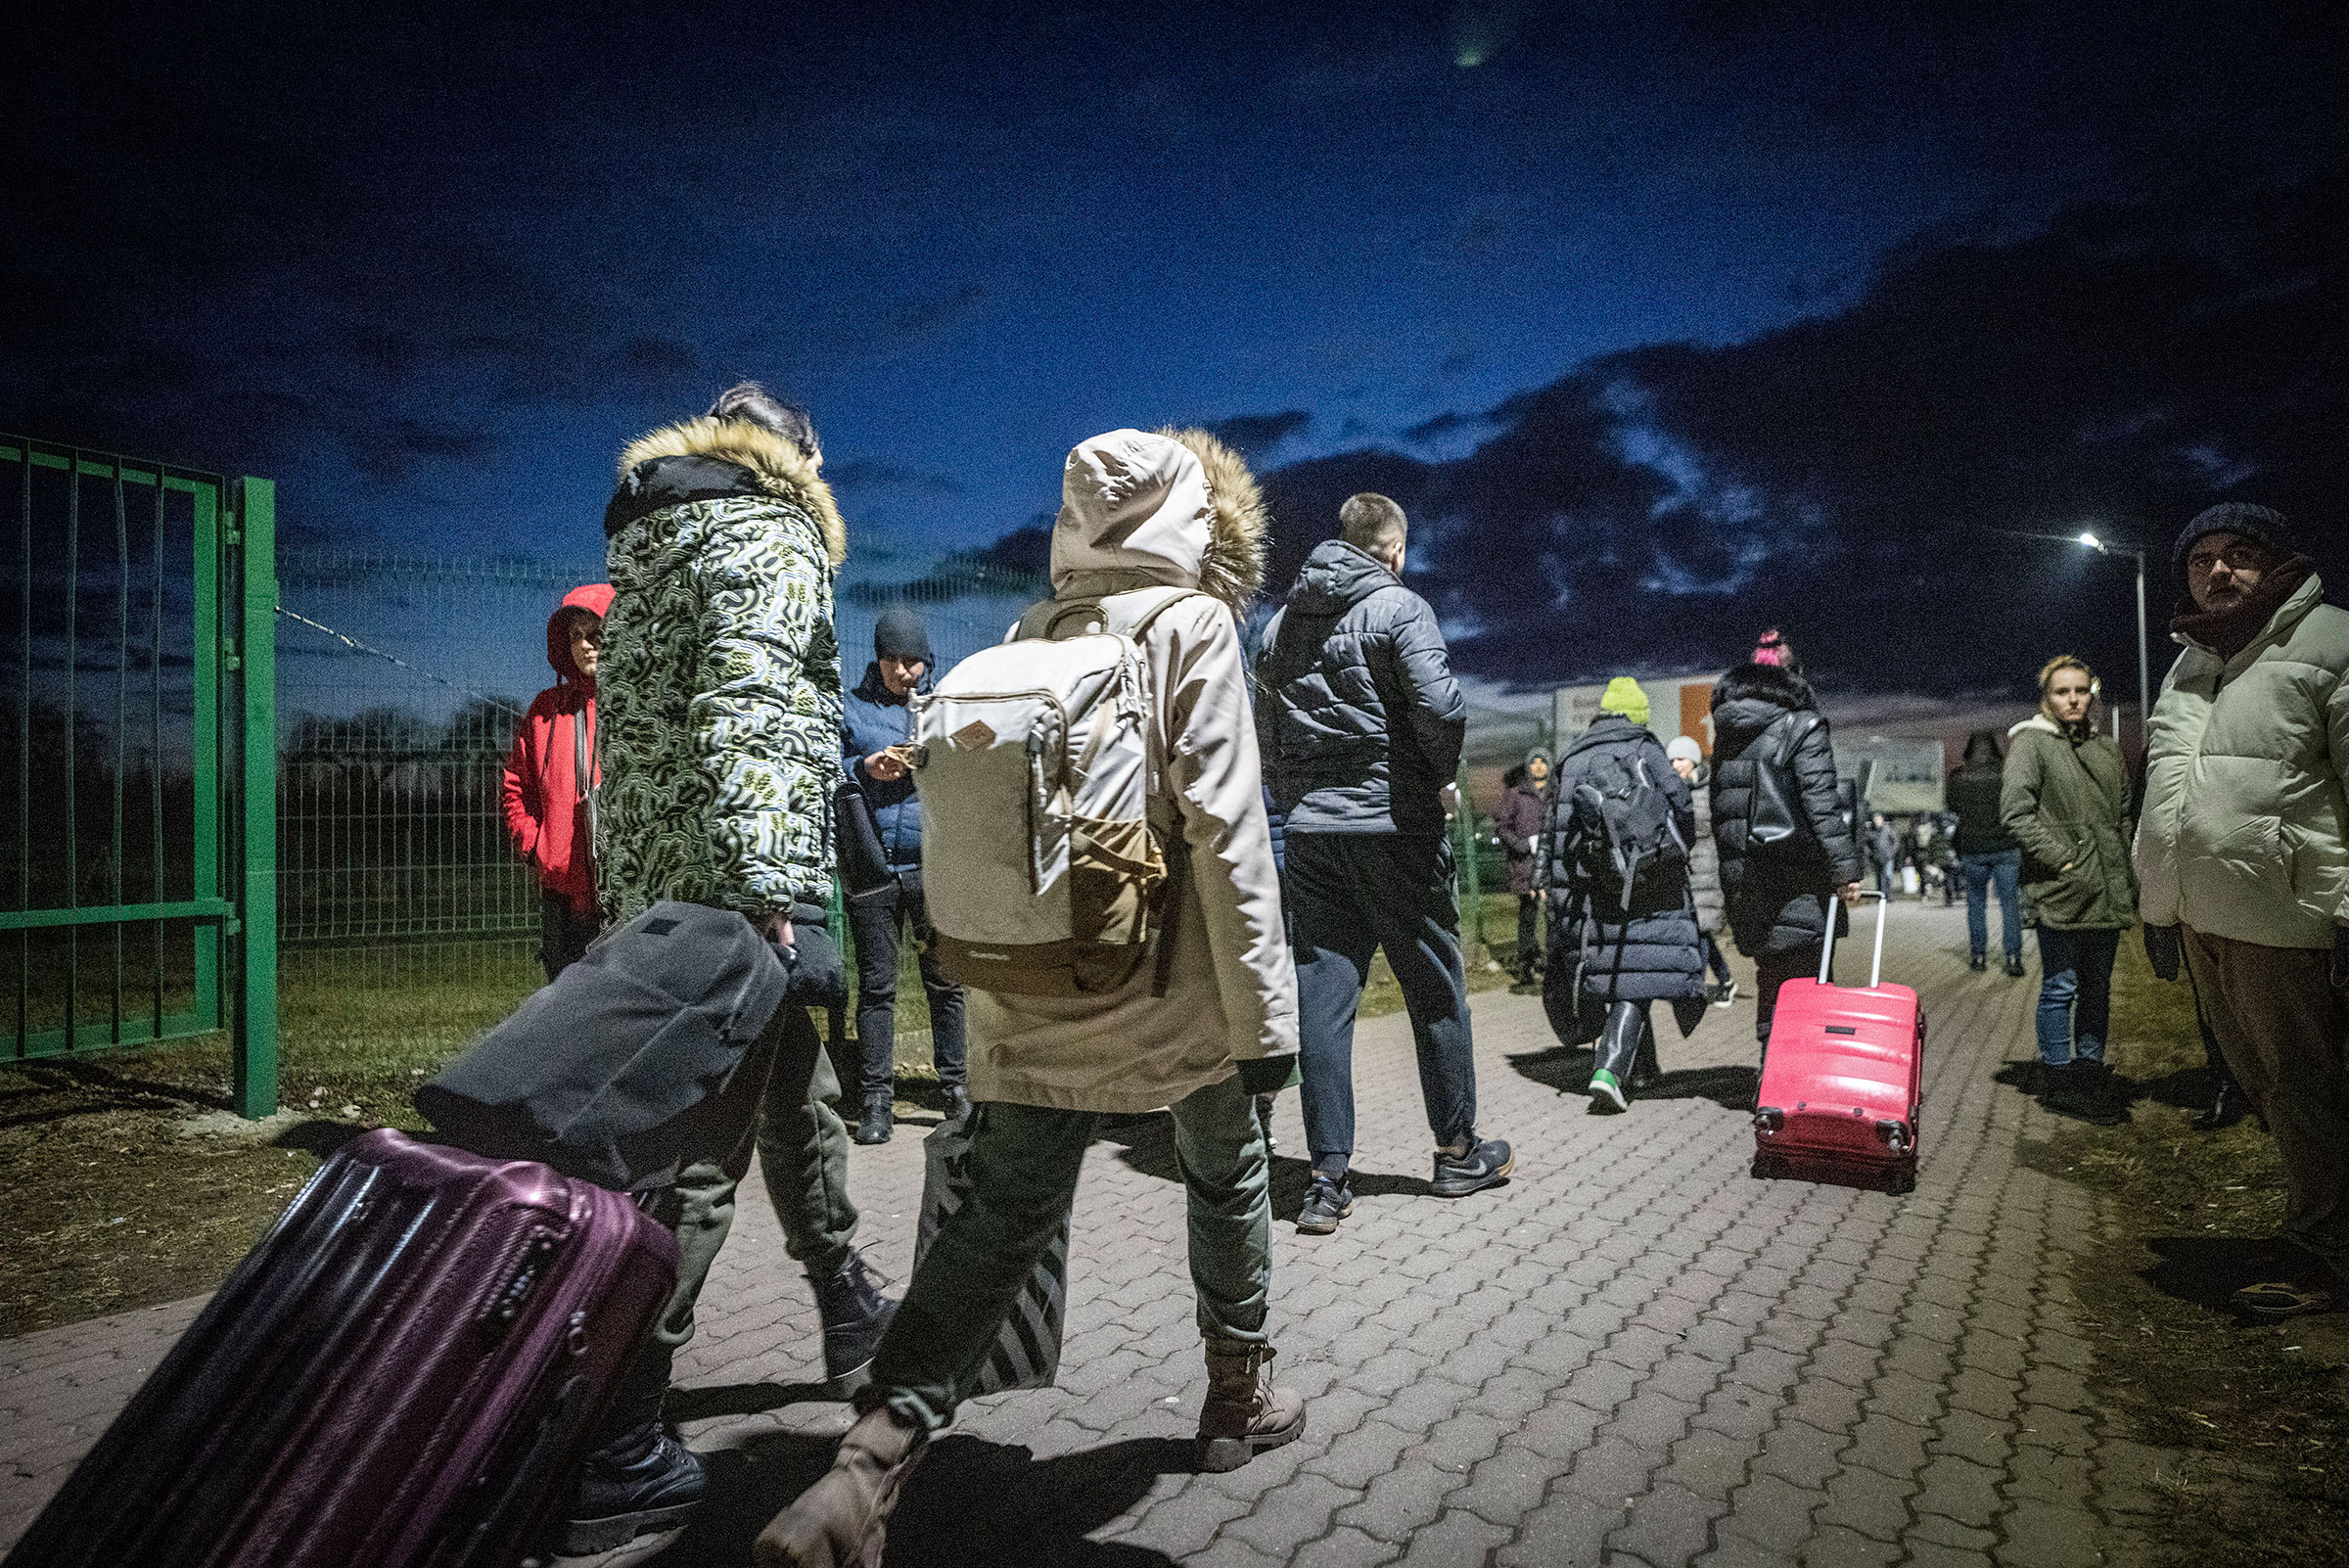 Refugees from Ukraine arrive in Medyka, Poland after crossing the border from Shehyni, Ukraine on Feb. 25, 2022. (Michael Kappeler—picture-allianc/AP)